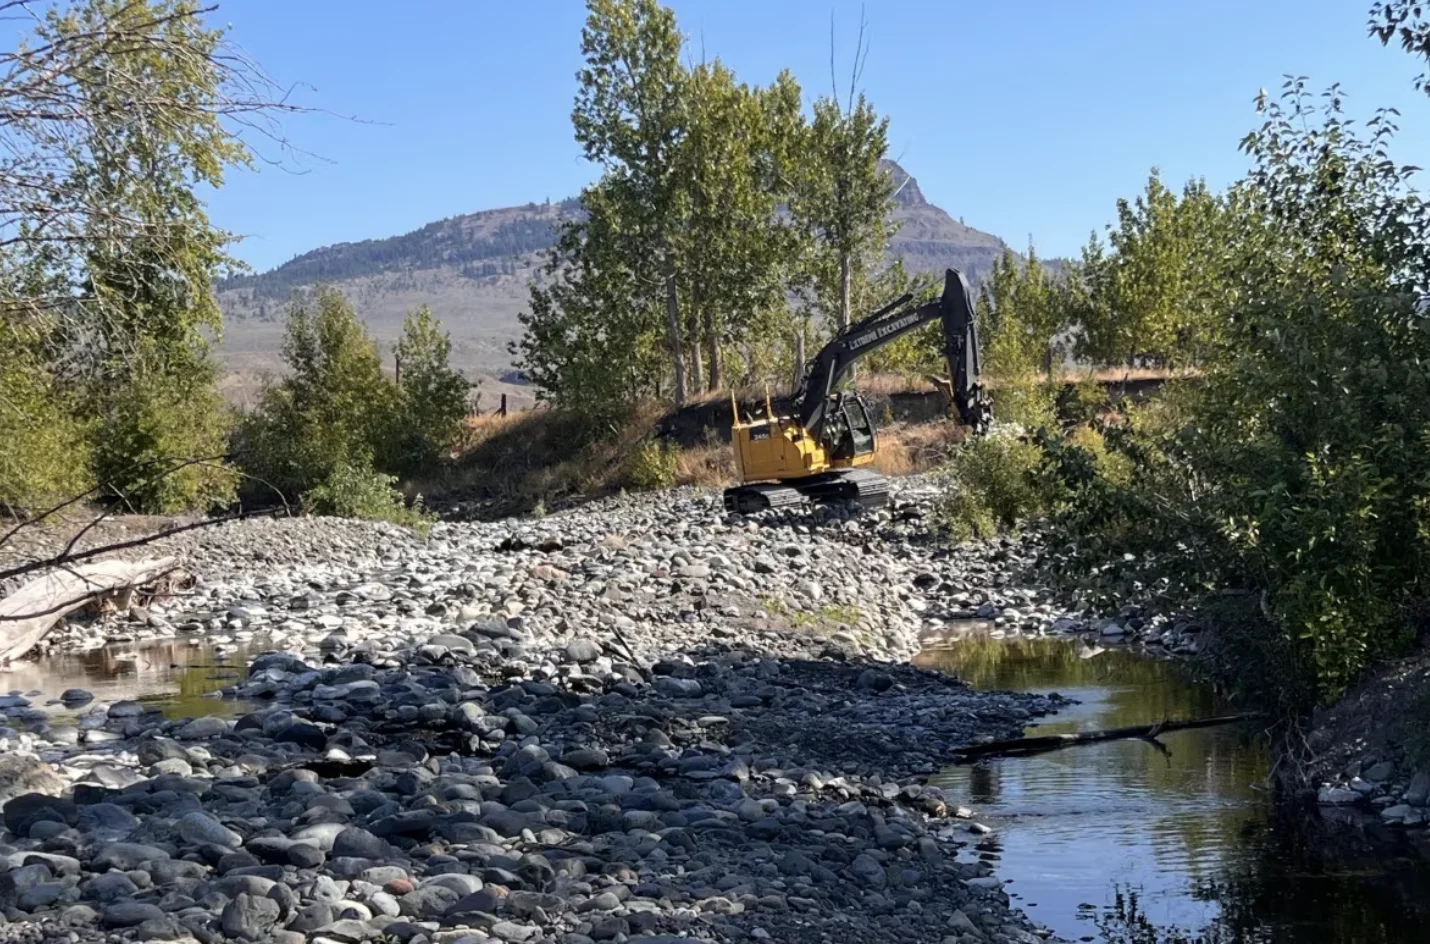 cbc: An excavator works to dig out a new stream bed for salmon to swim in after Tranquille Creek dried up due to drought. (Doug Herbert/CBC News)